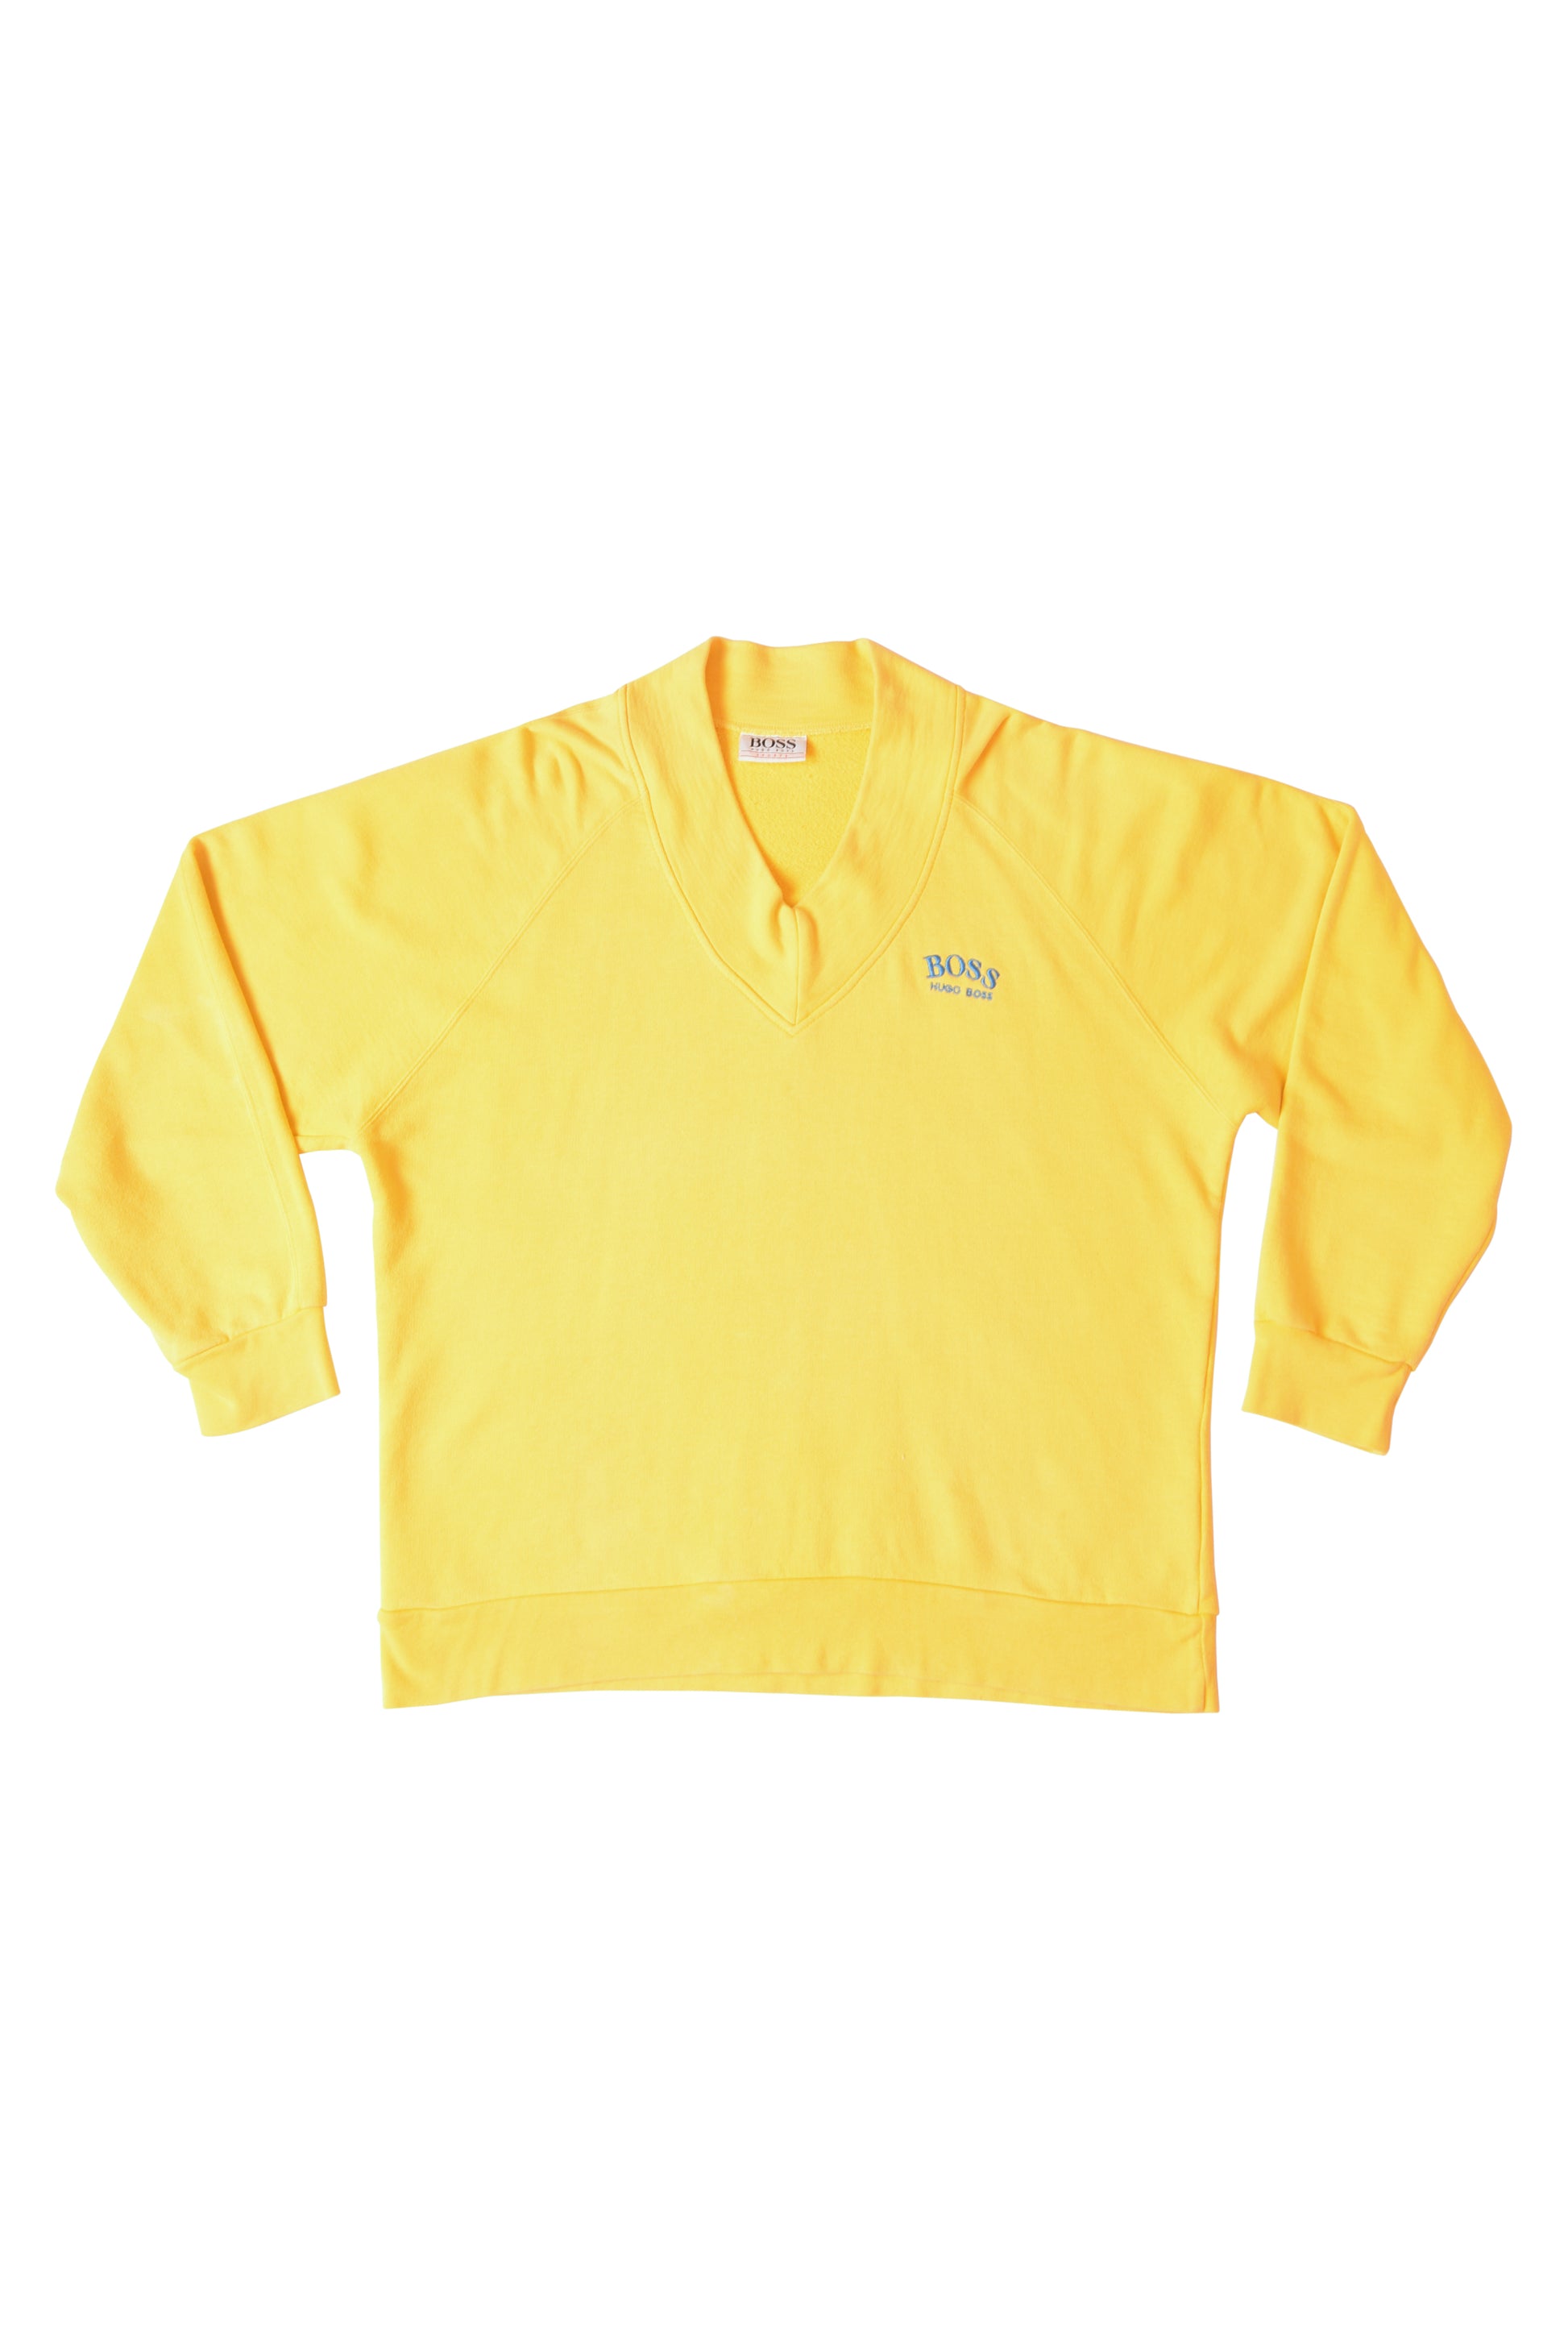 Vintage Hugo Boss Sweatshirt 80's Made in West Germany Yellow Size L